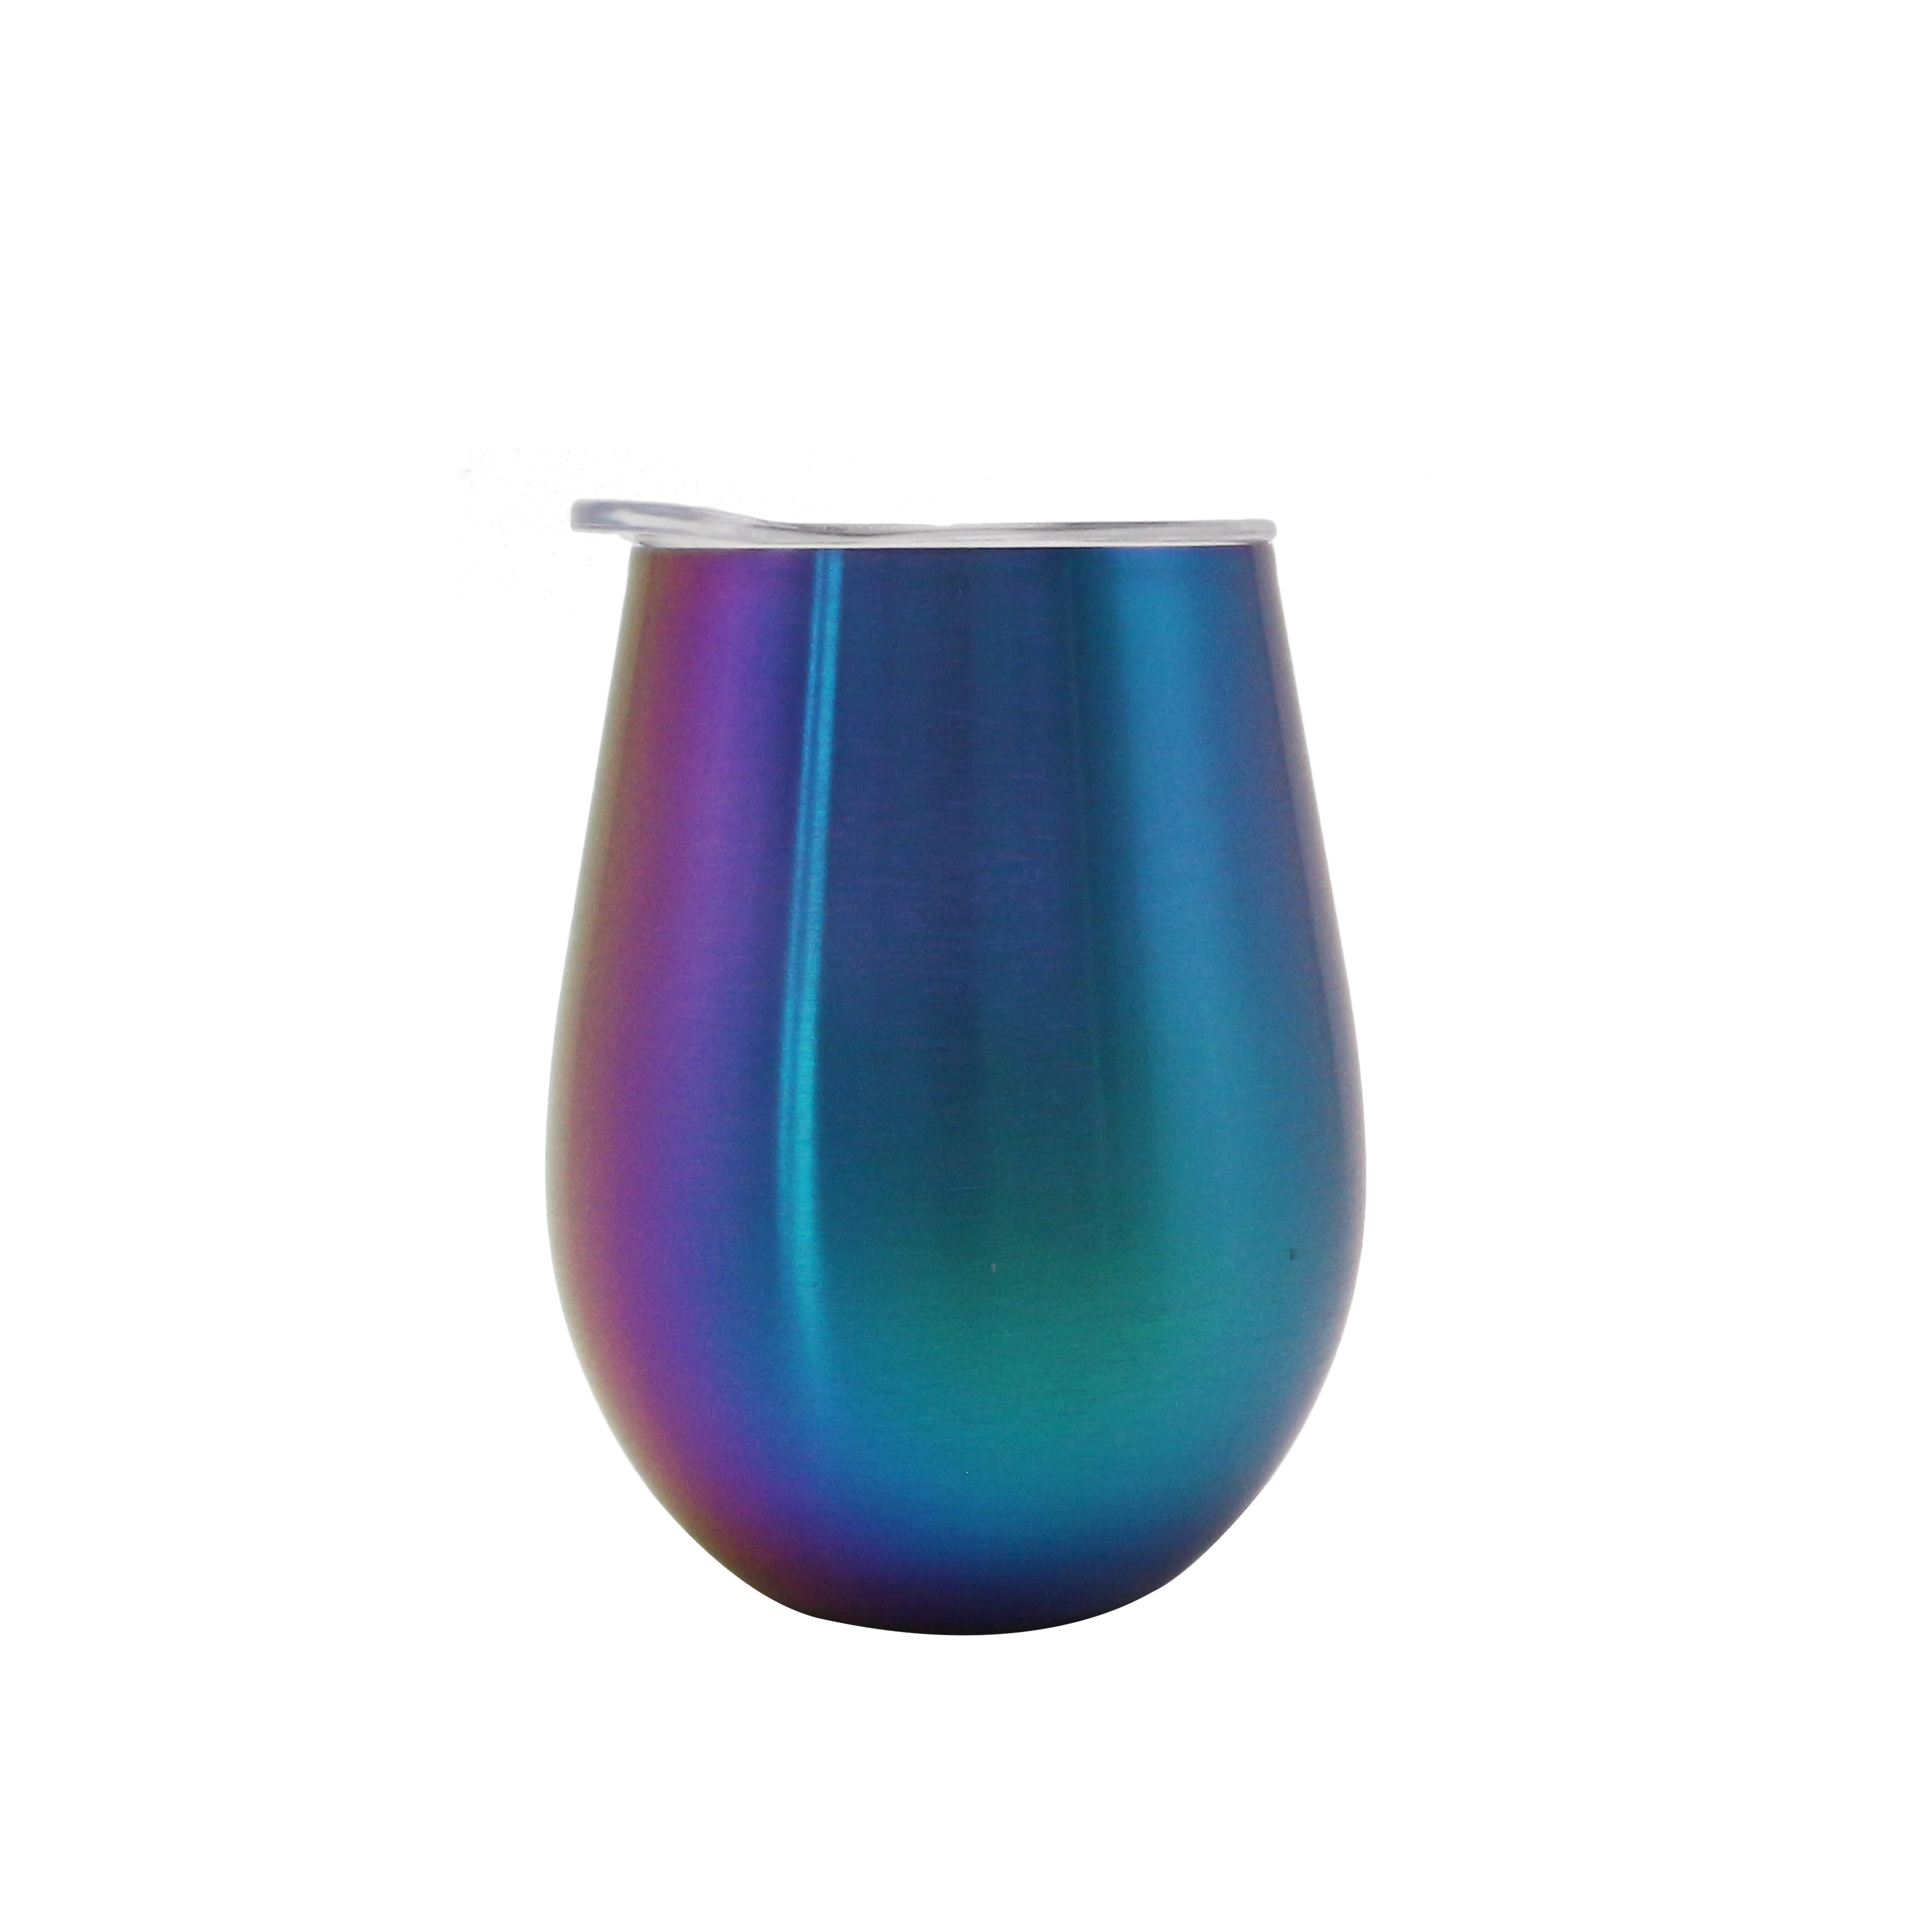 Mainstays Double Wall Stainless Steel 10 oz. Rainbow Wine Tumblers, 4 Pack - image 2 of 6